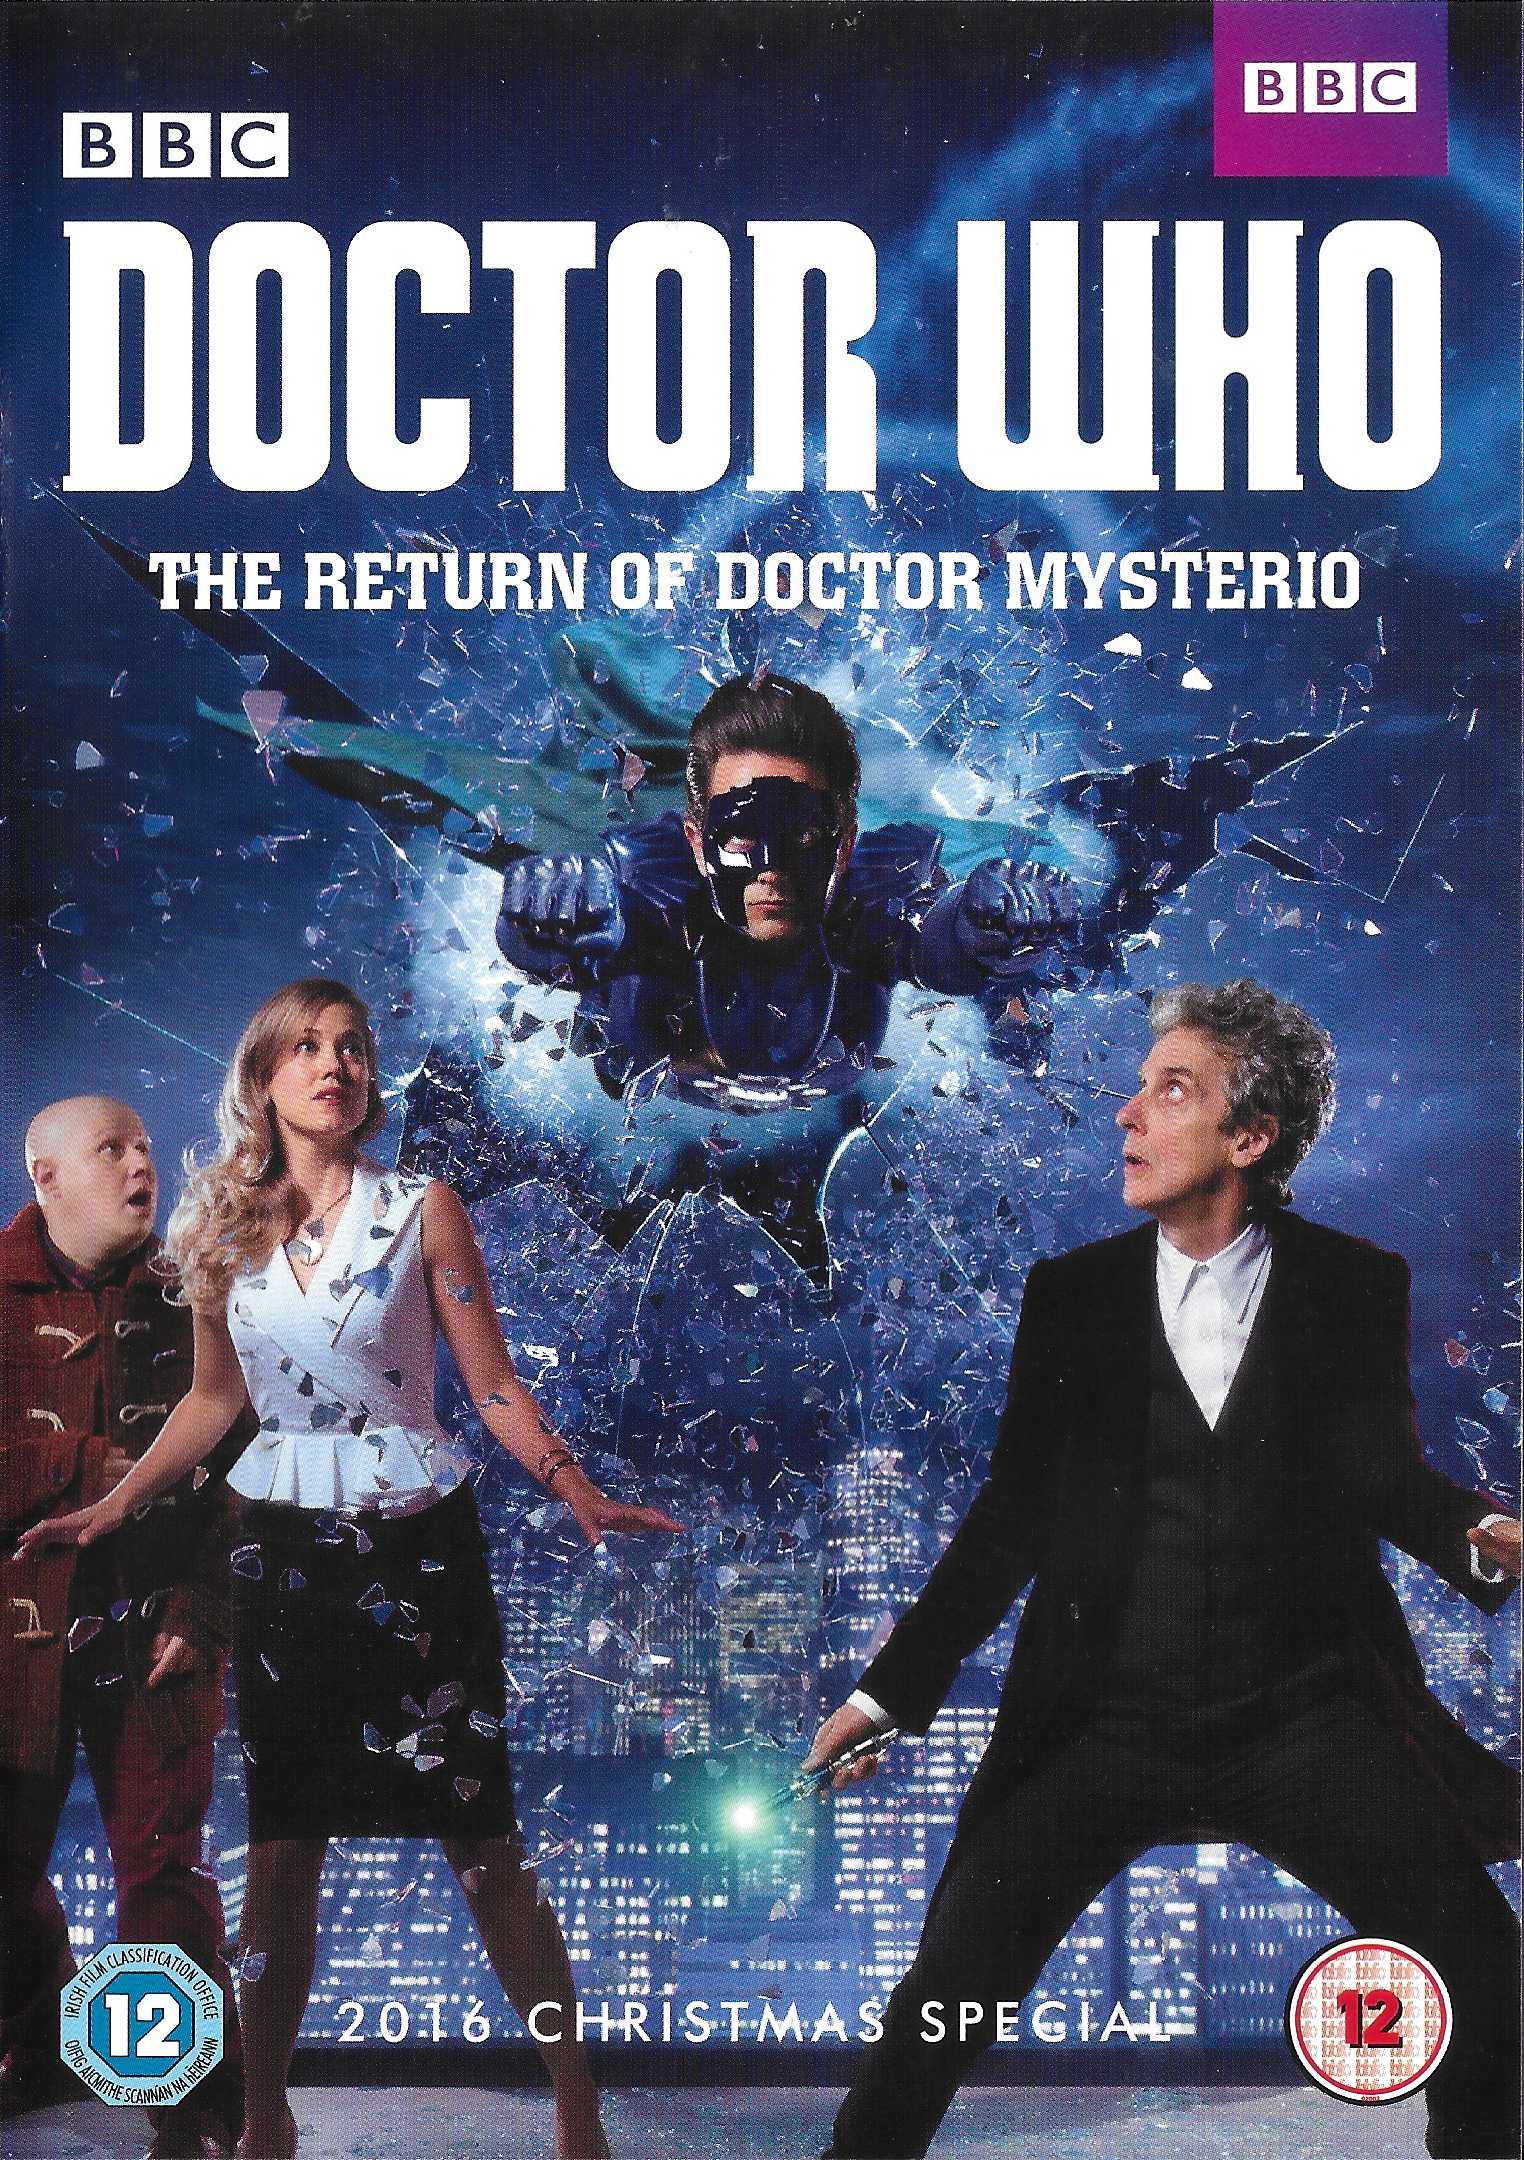 Picture of BBCDVD 4190 Doctor Who - The return of Doctor Mysterio by artist Steven Moffat from the BBC dvds - Records and Tapes library